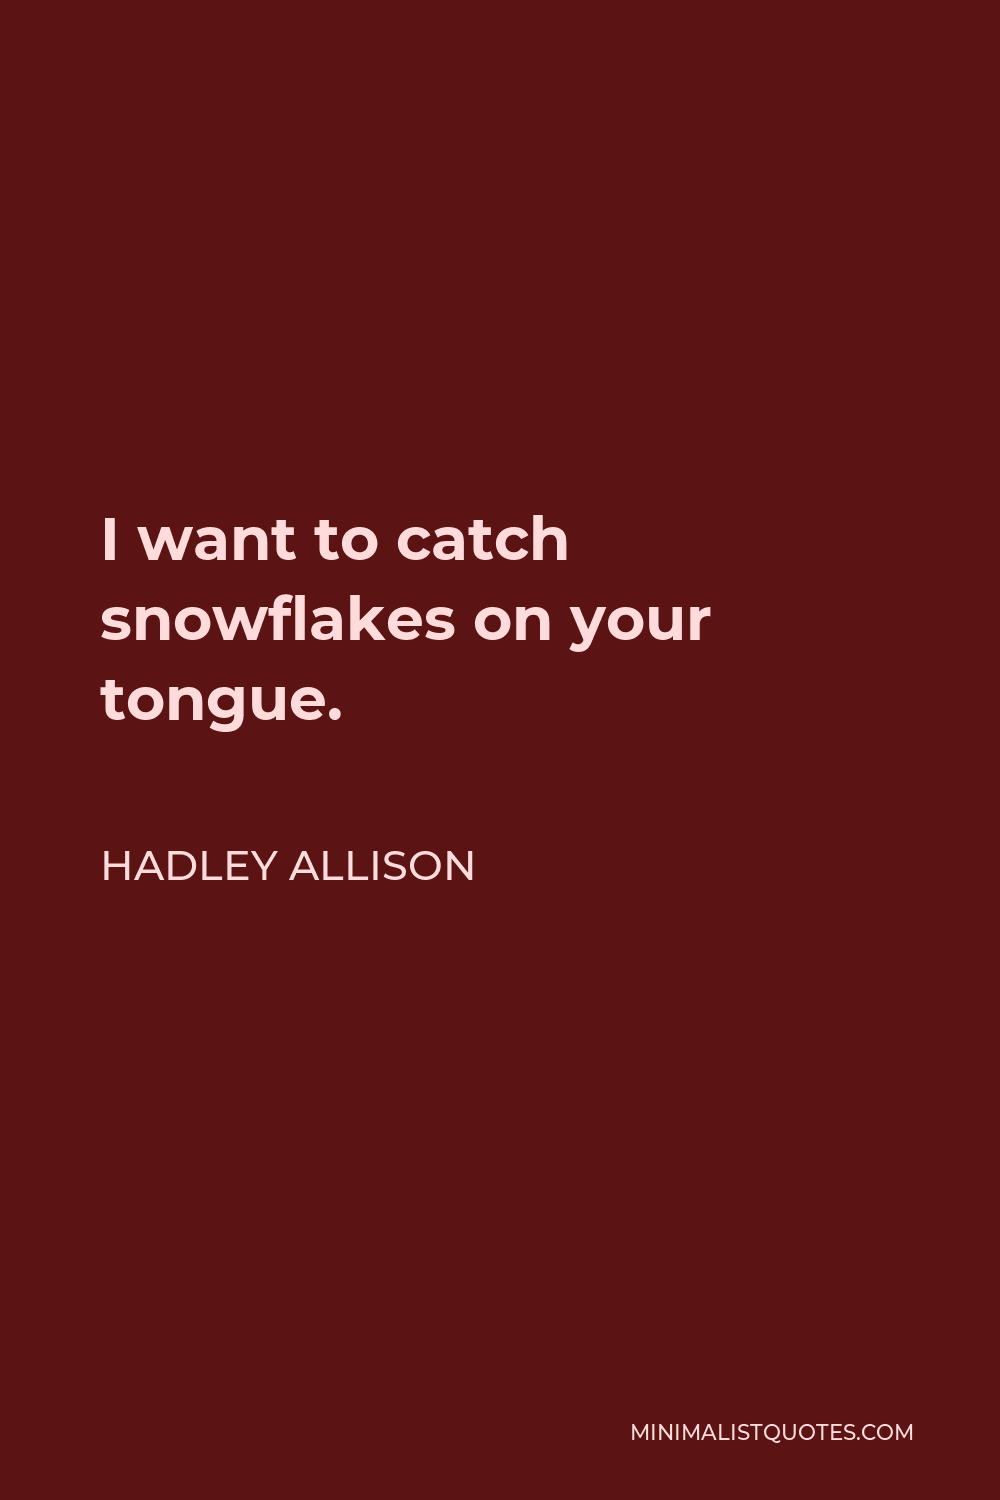 Hadley Allison Quote - I want to catch snowflakes on your tongue.